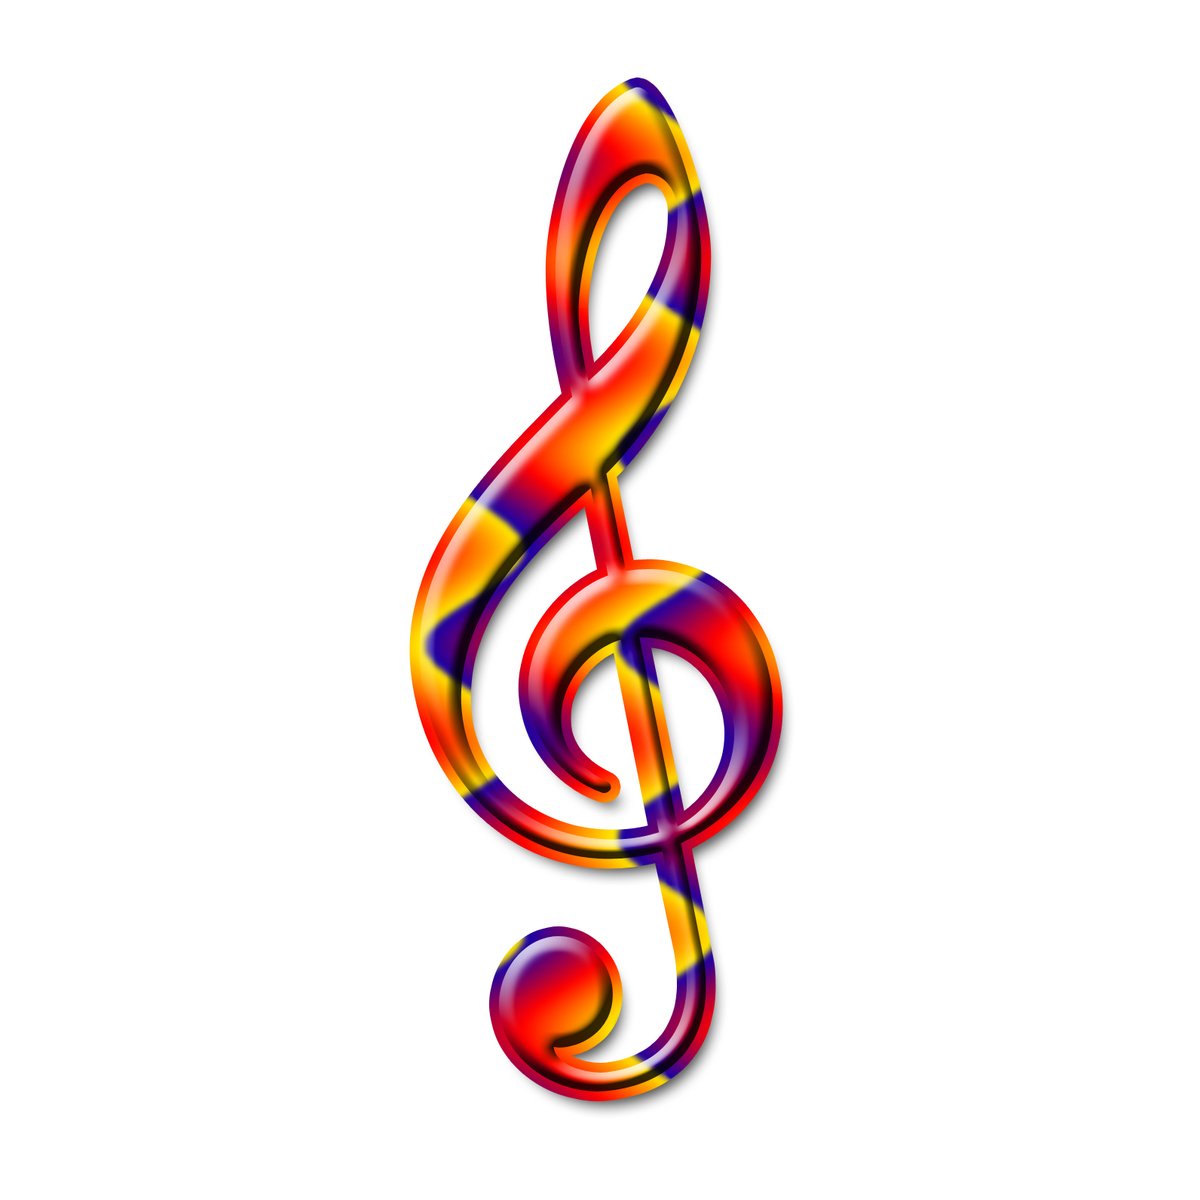 colorful treble with three strings is shown